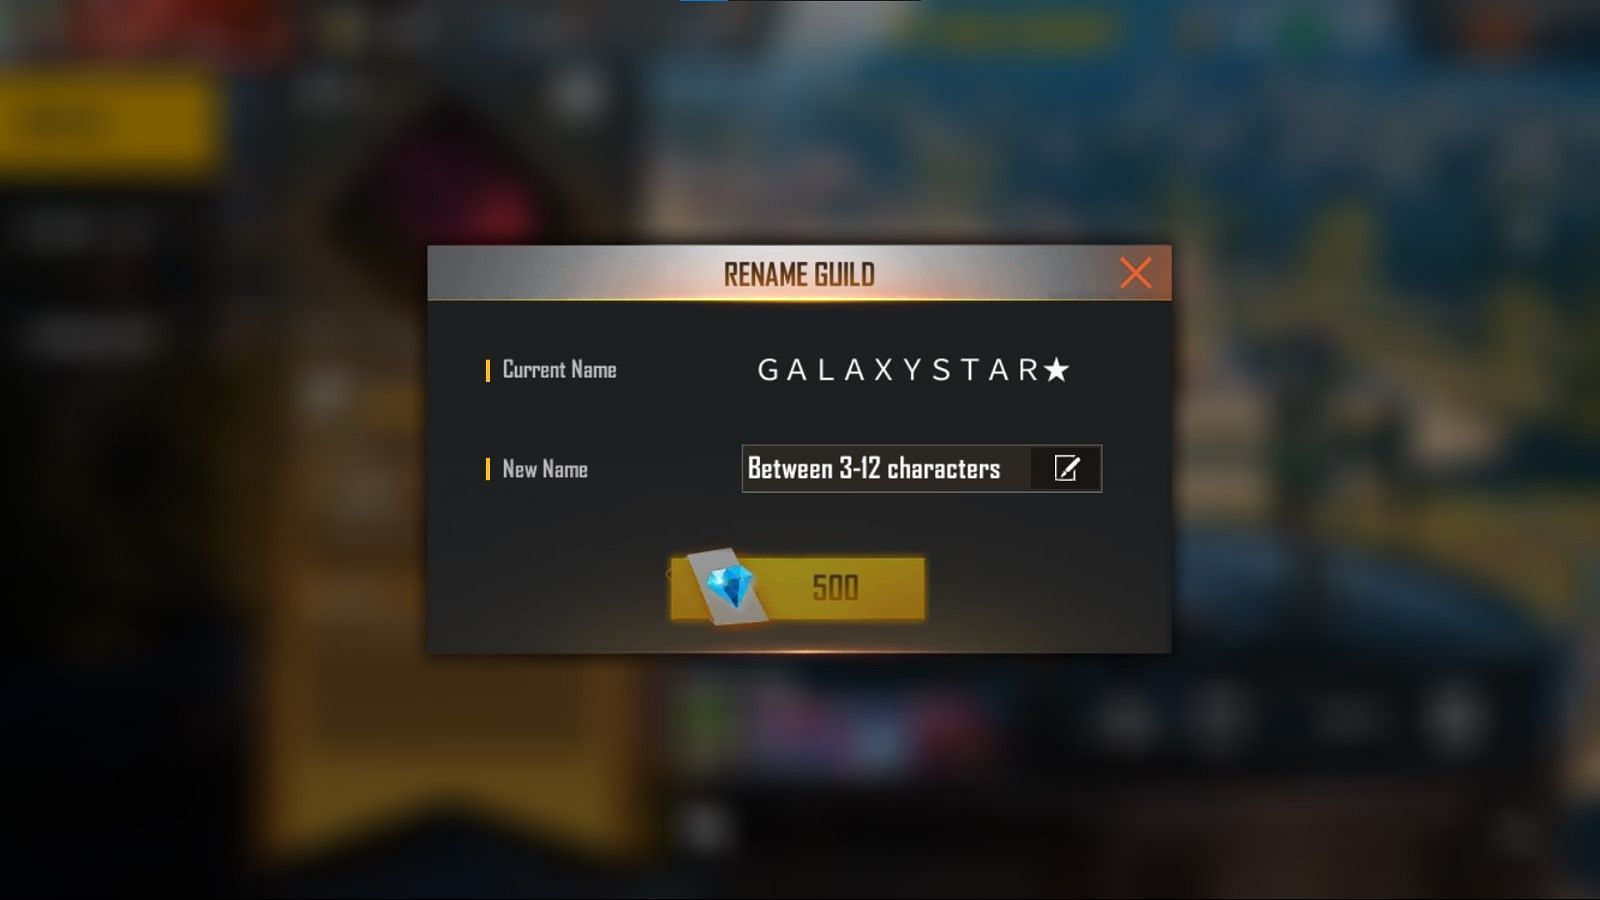 It is quite expensive to change the guild name (Image via Garena)